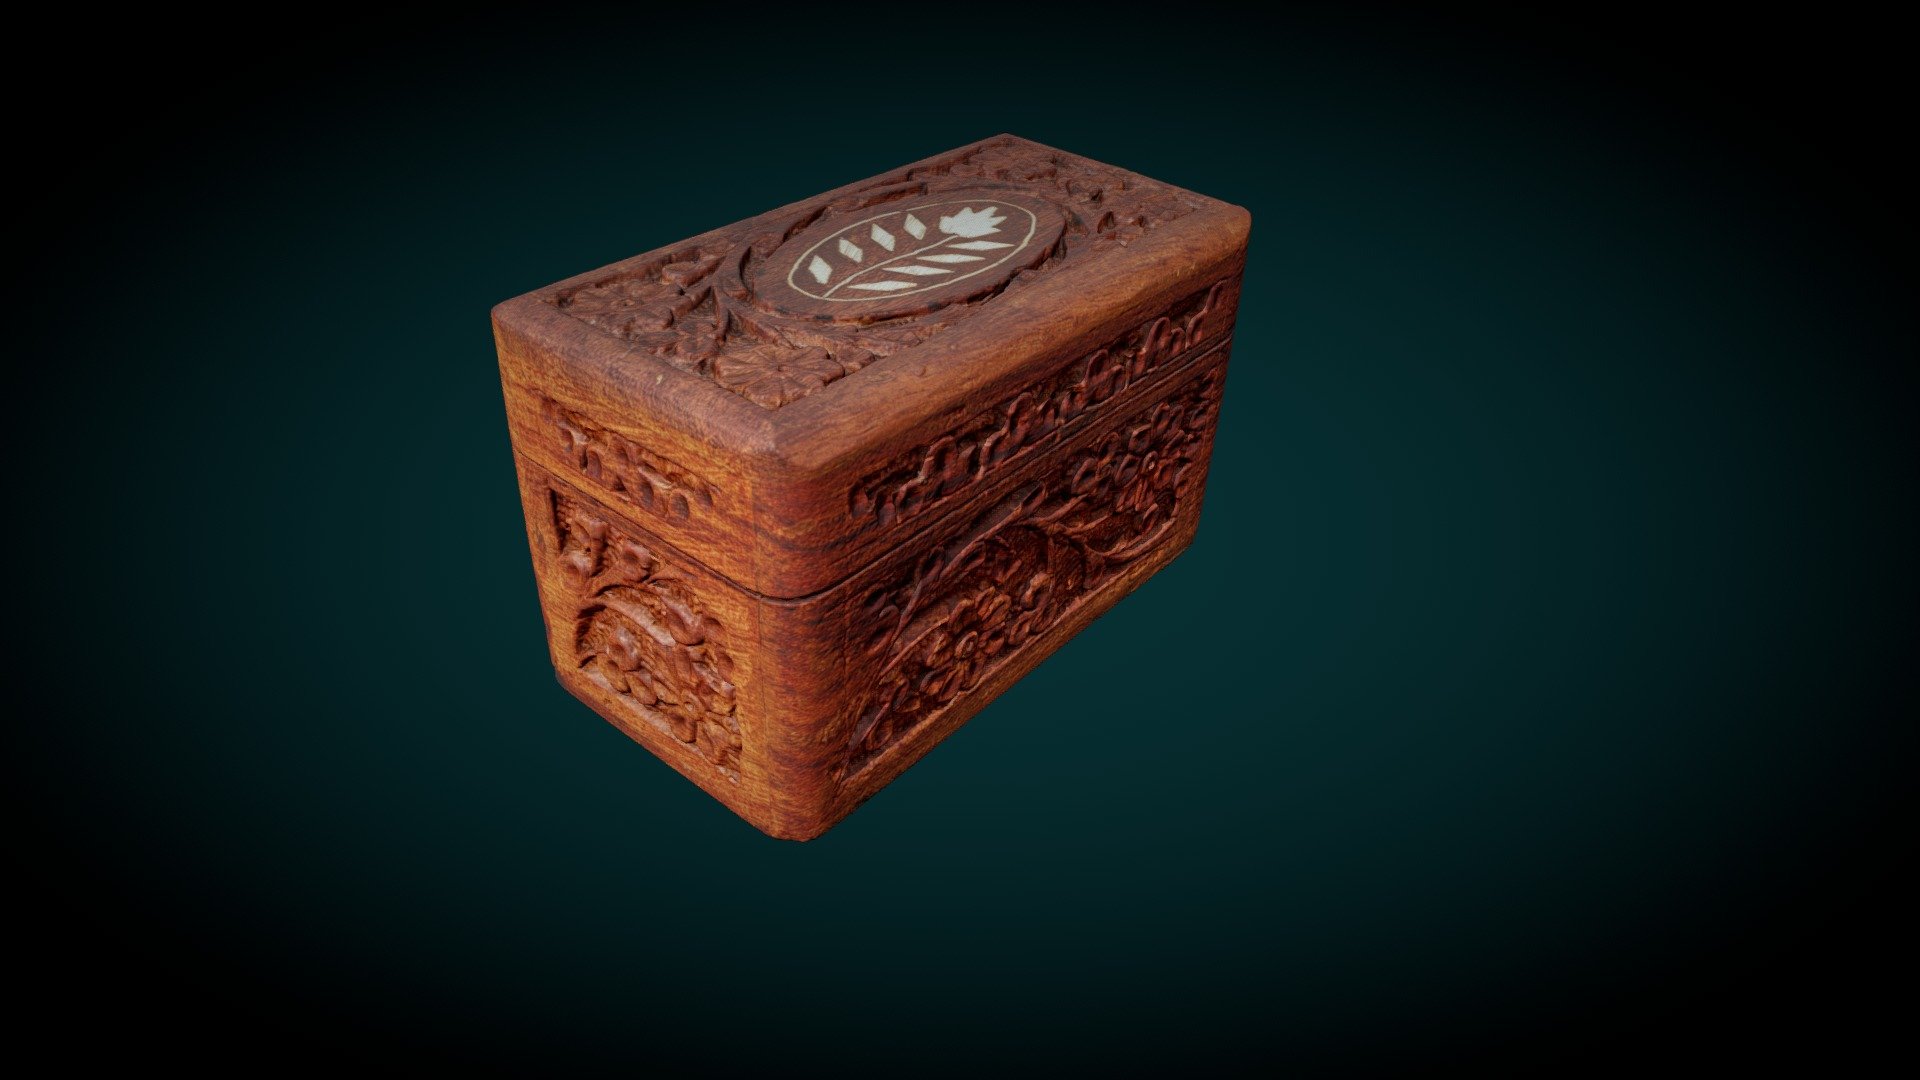 Vintage Carved Wooden Box with Hing Closure and Inlay Detail Top. 

Created in RealityCapture by Capturing Reality from 364 images - Vintage Wood  Jewelry Box with Floral Inlay - Buy Royalty Free 3D model by Gregory Arbit (@gregoryarbit) 3d model